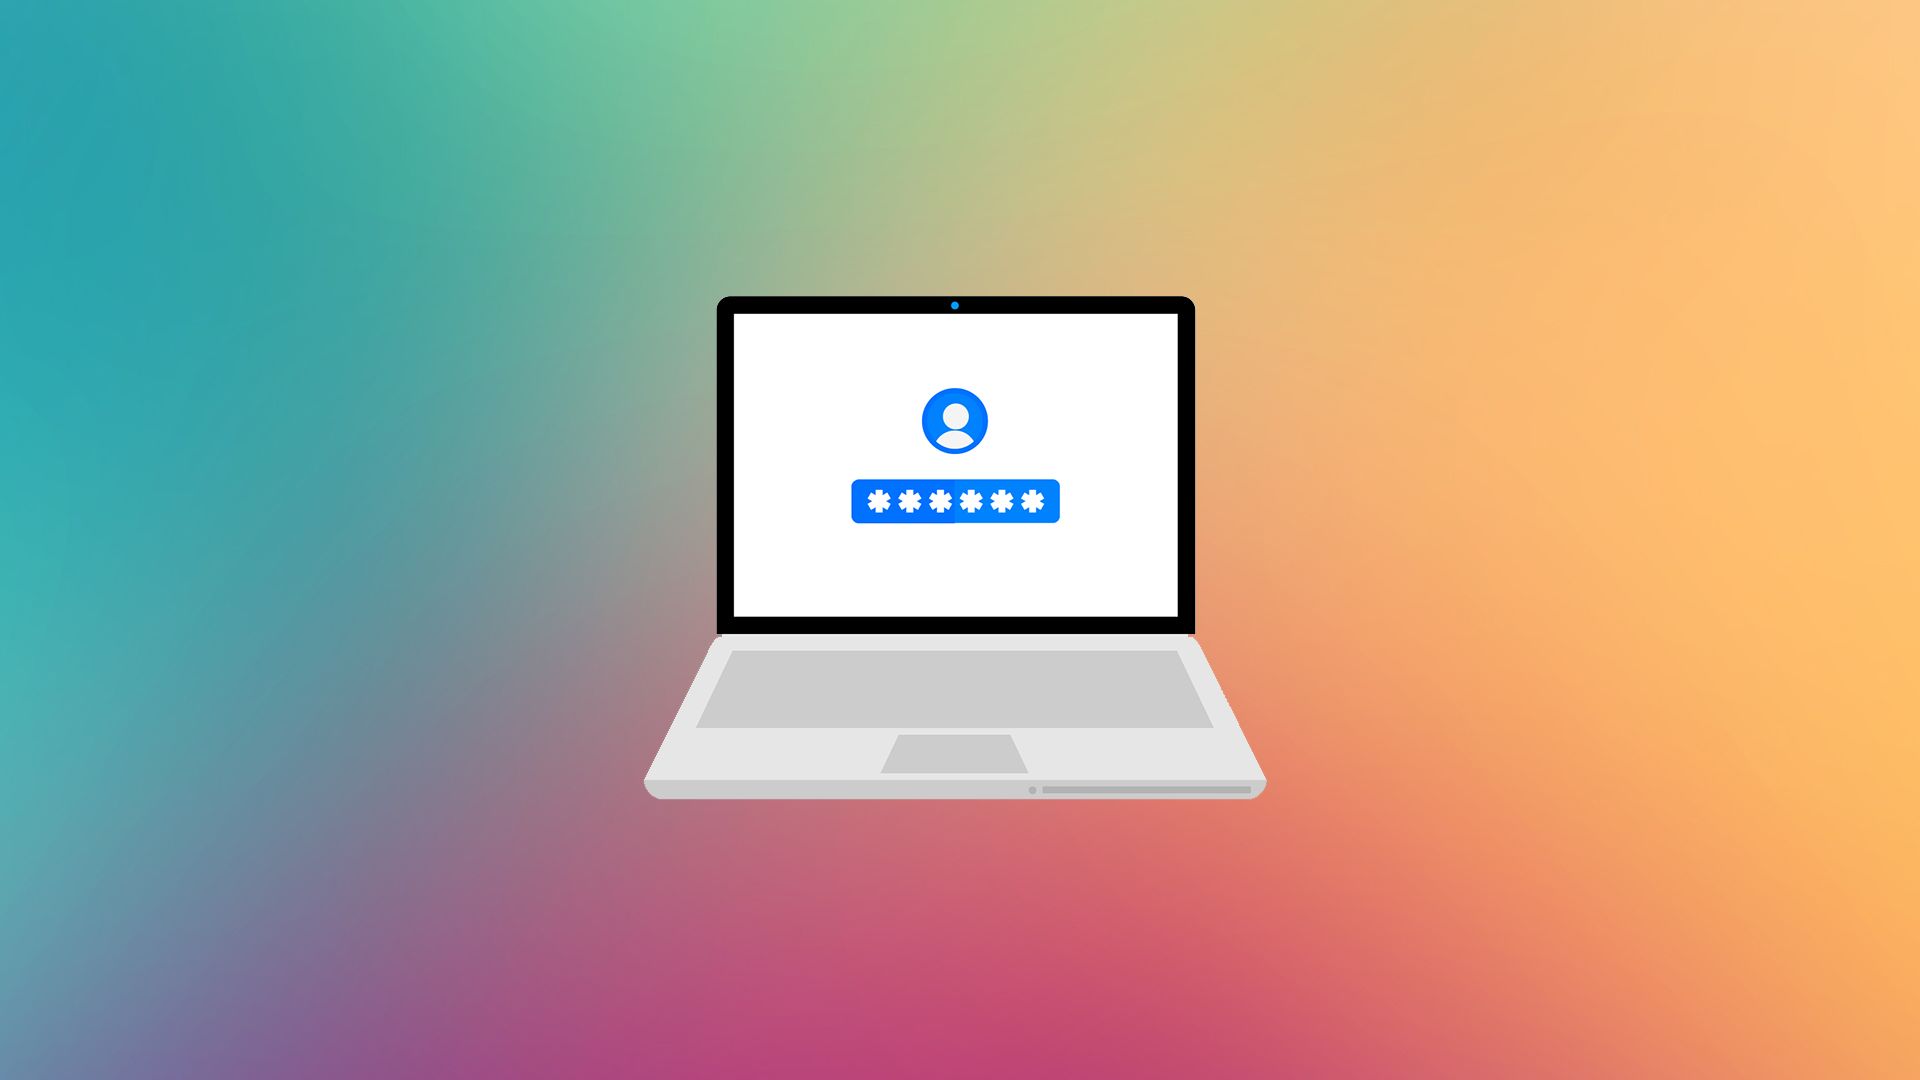 Ten simple steps for keeping your laptop secure